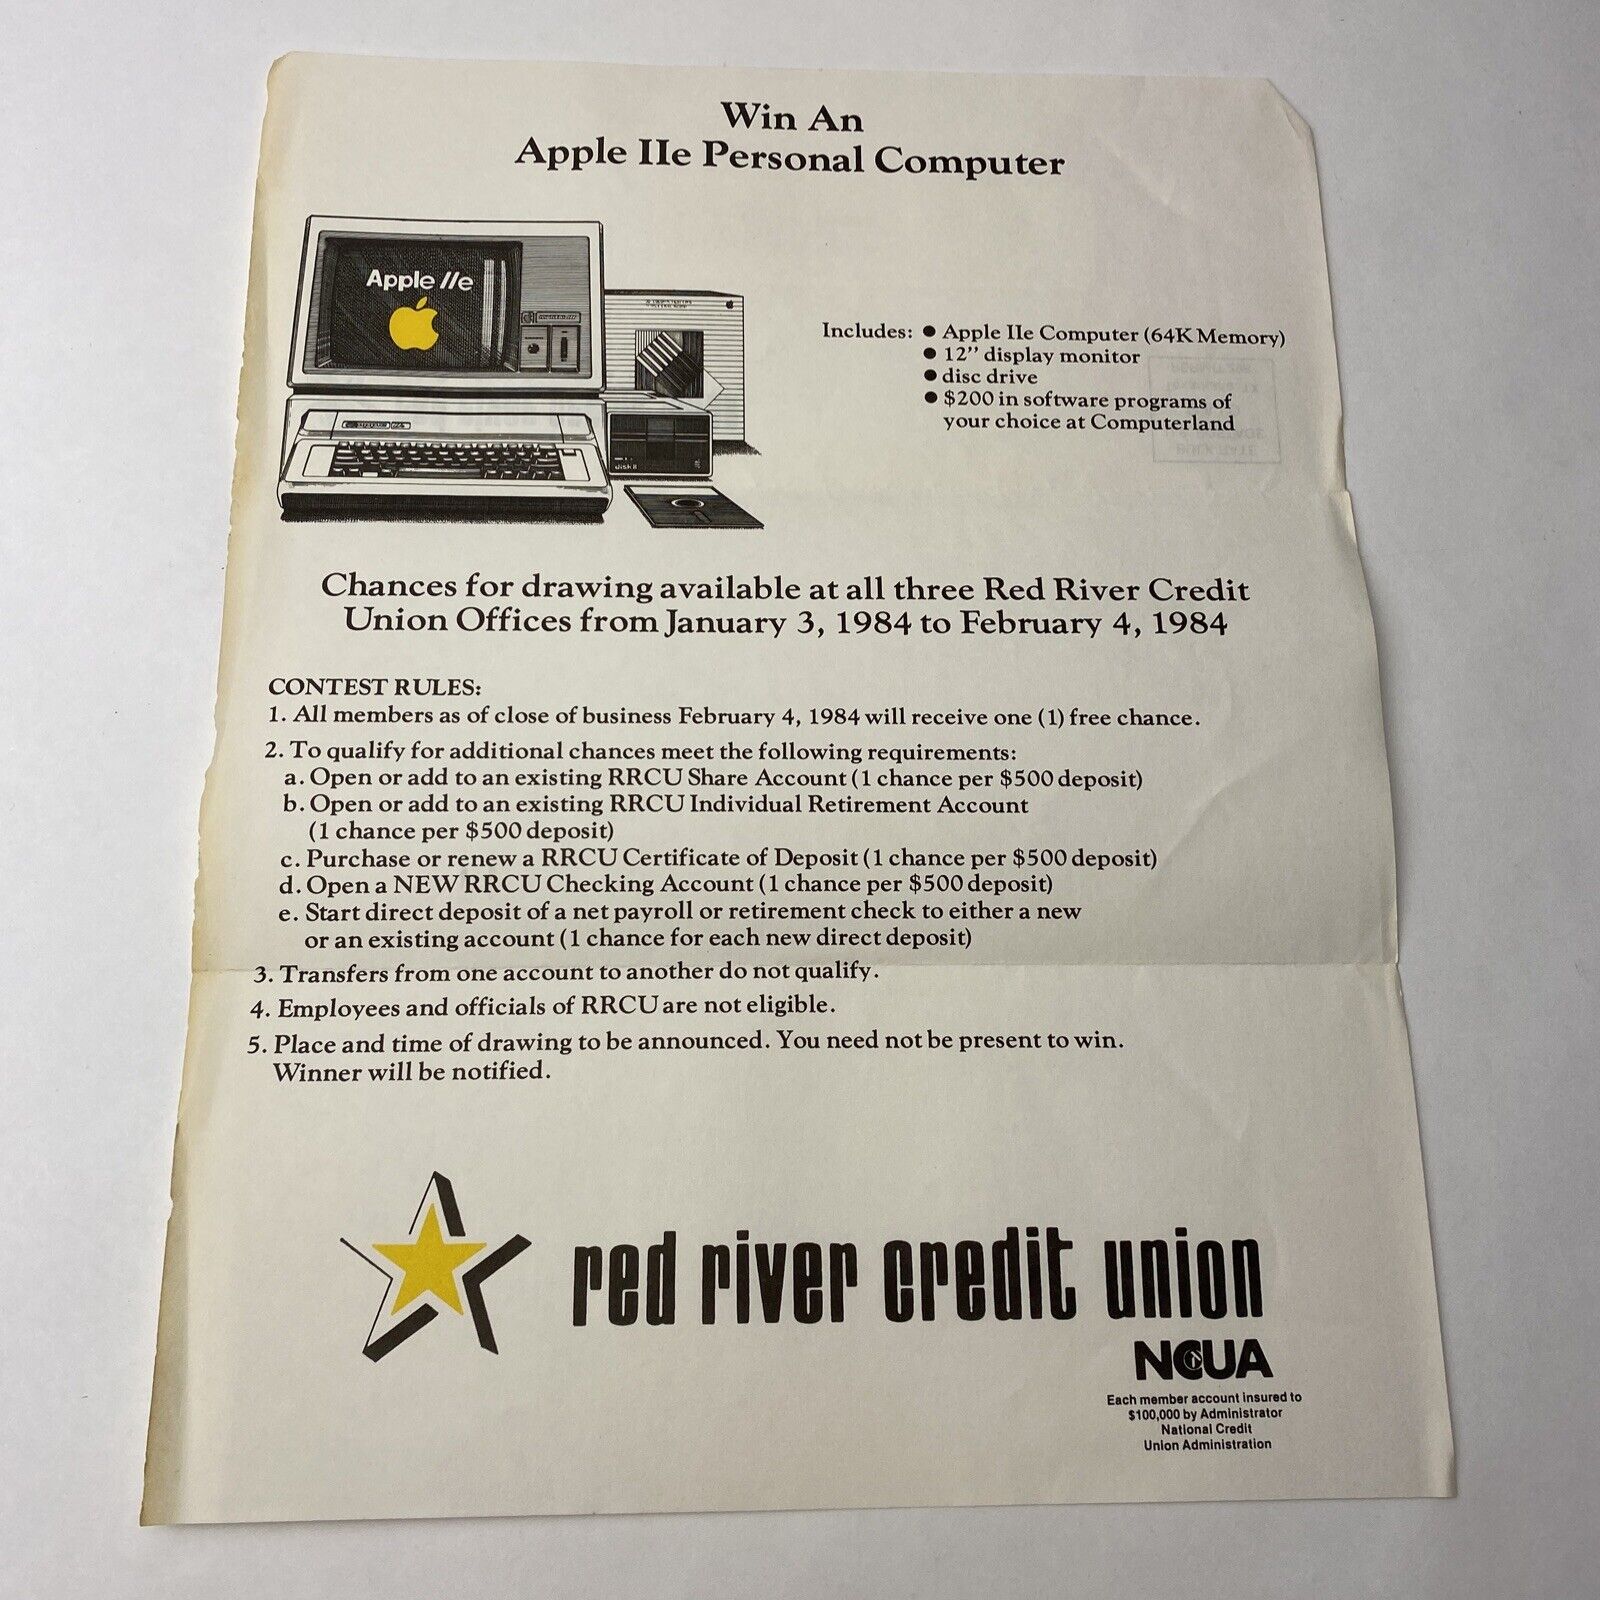 1984 Contest Vintage Ad Win Apple IIe Personal Computer by Red River Credit Unio